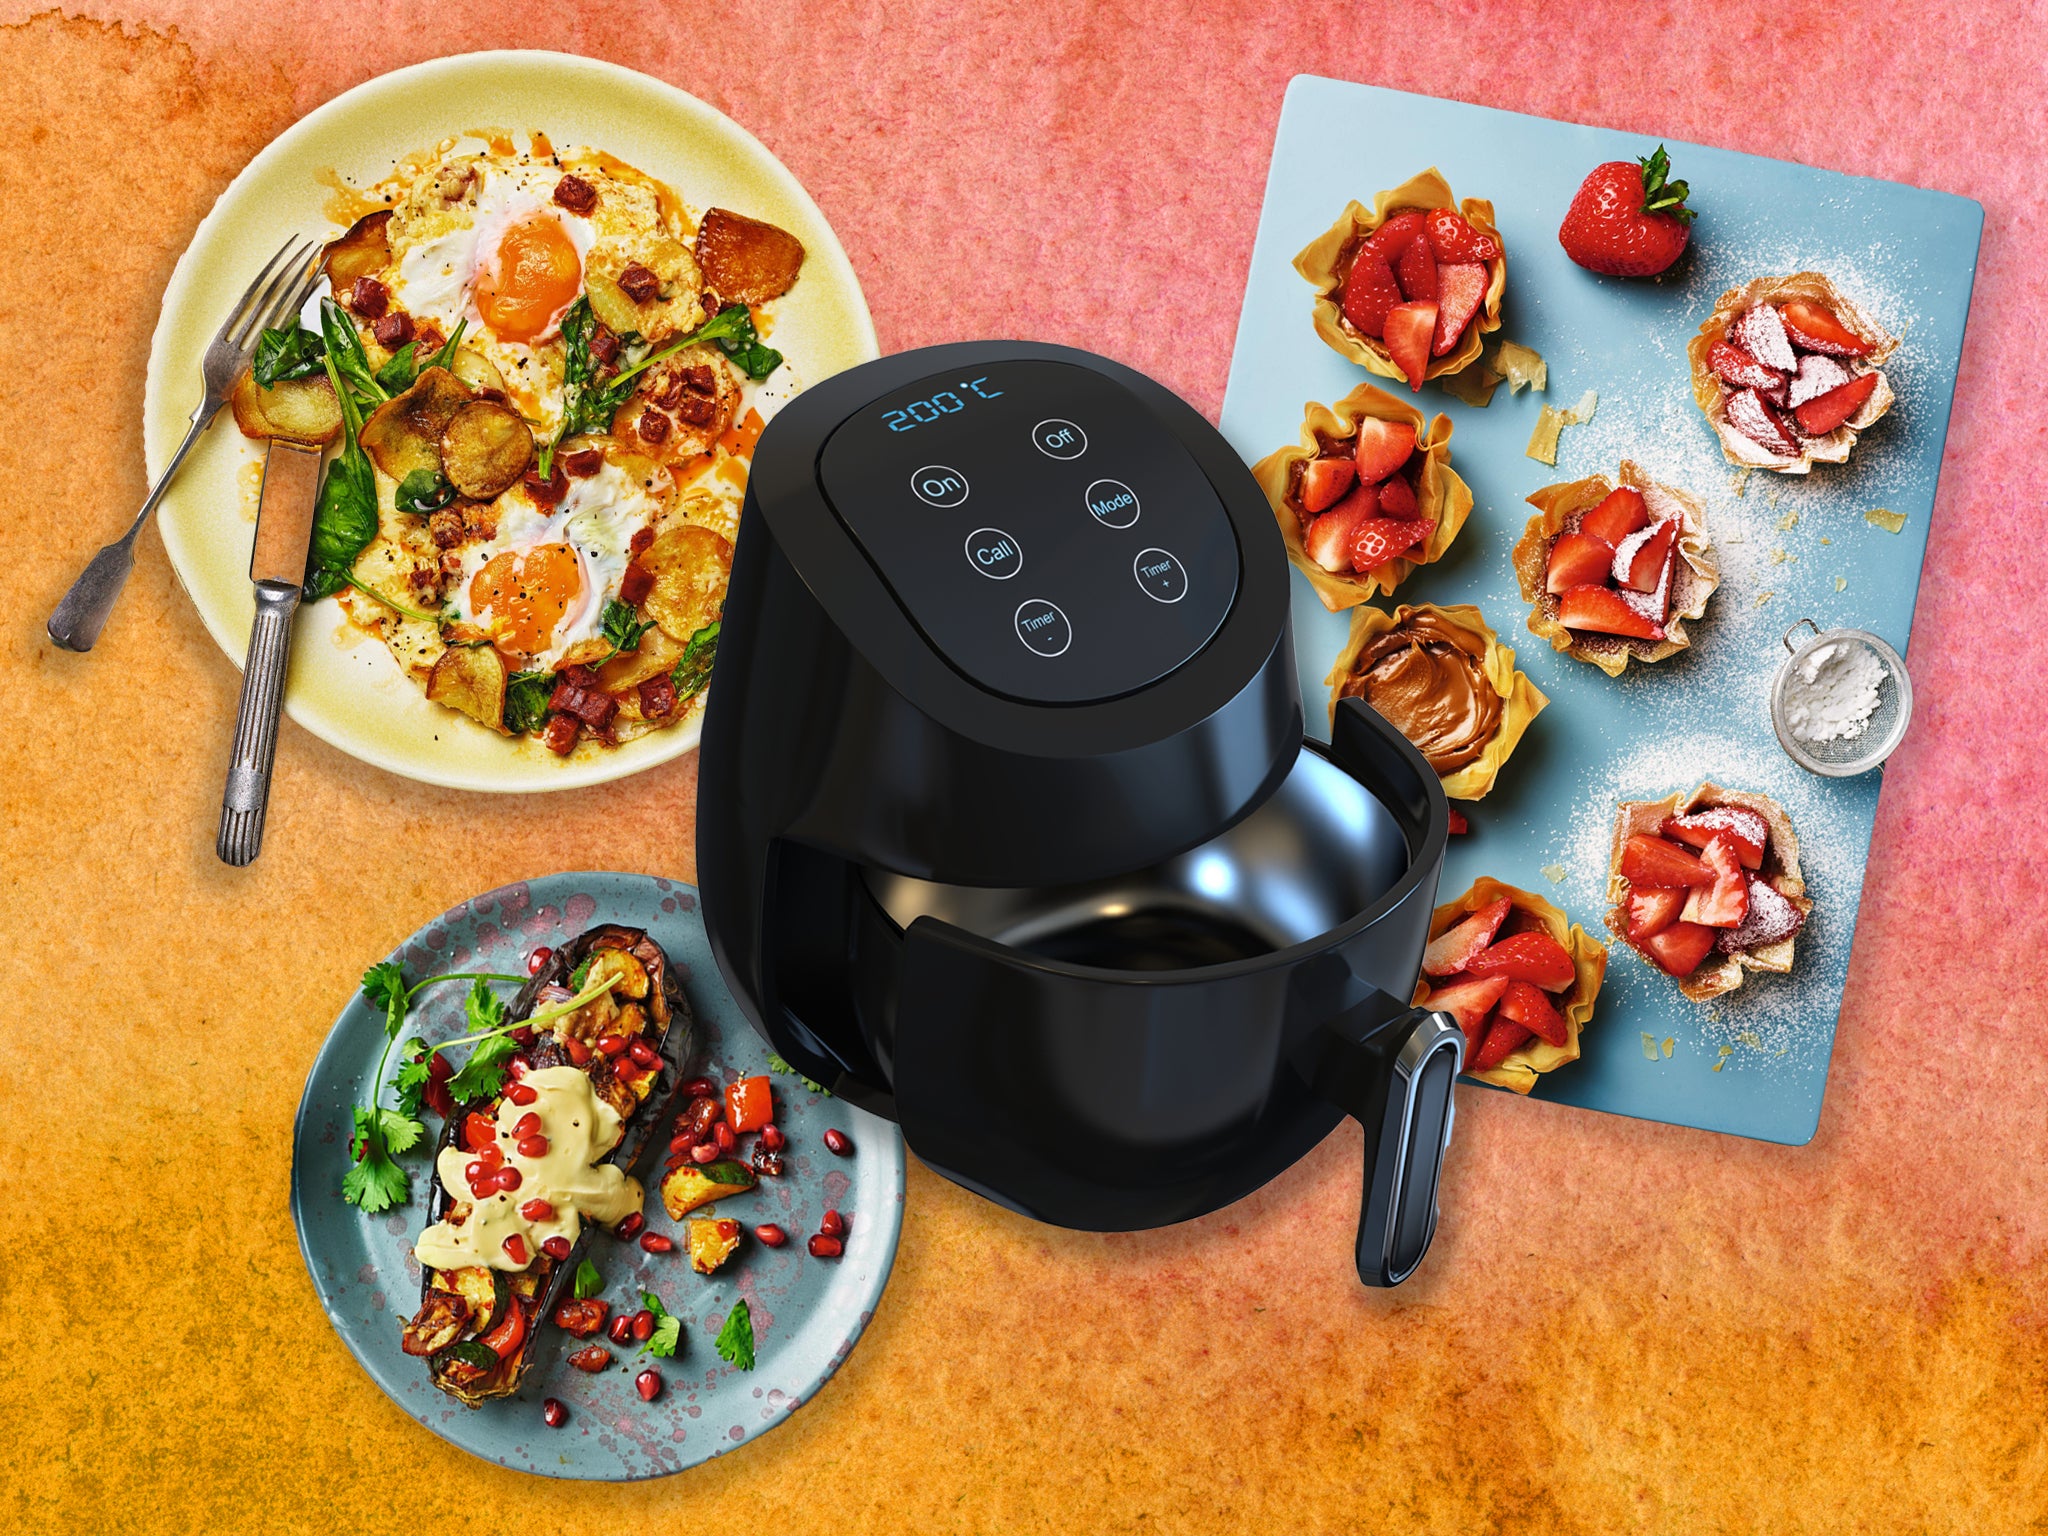 You can cook all manner of things in an air fryer